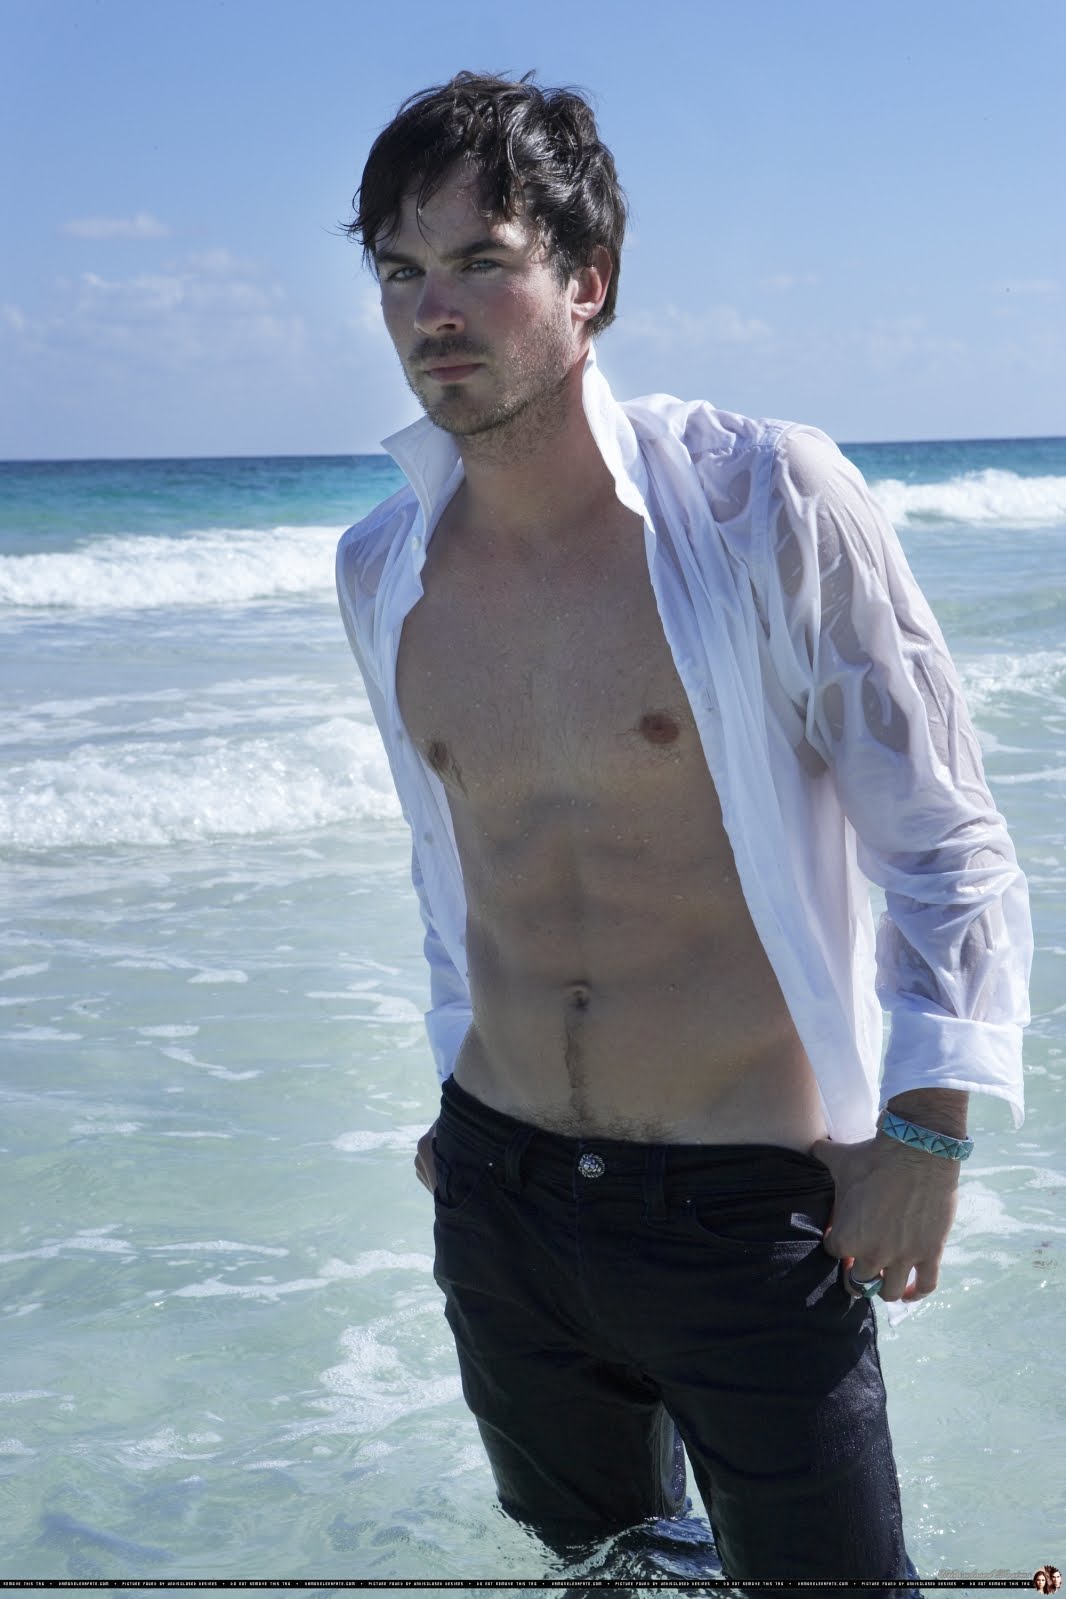 Obsessed with Hollywood: Ian Somerhalder's New Photoshoot on the beach!